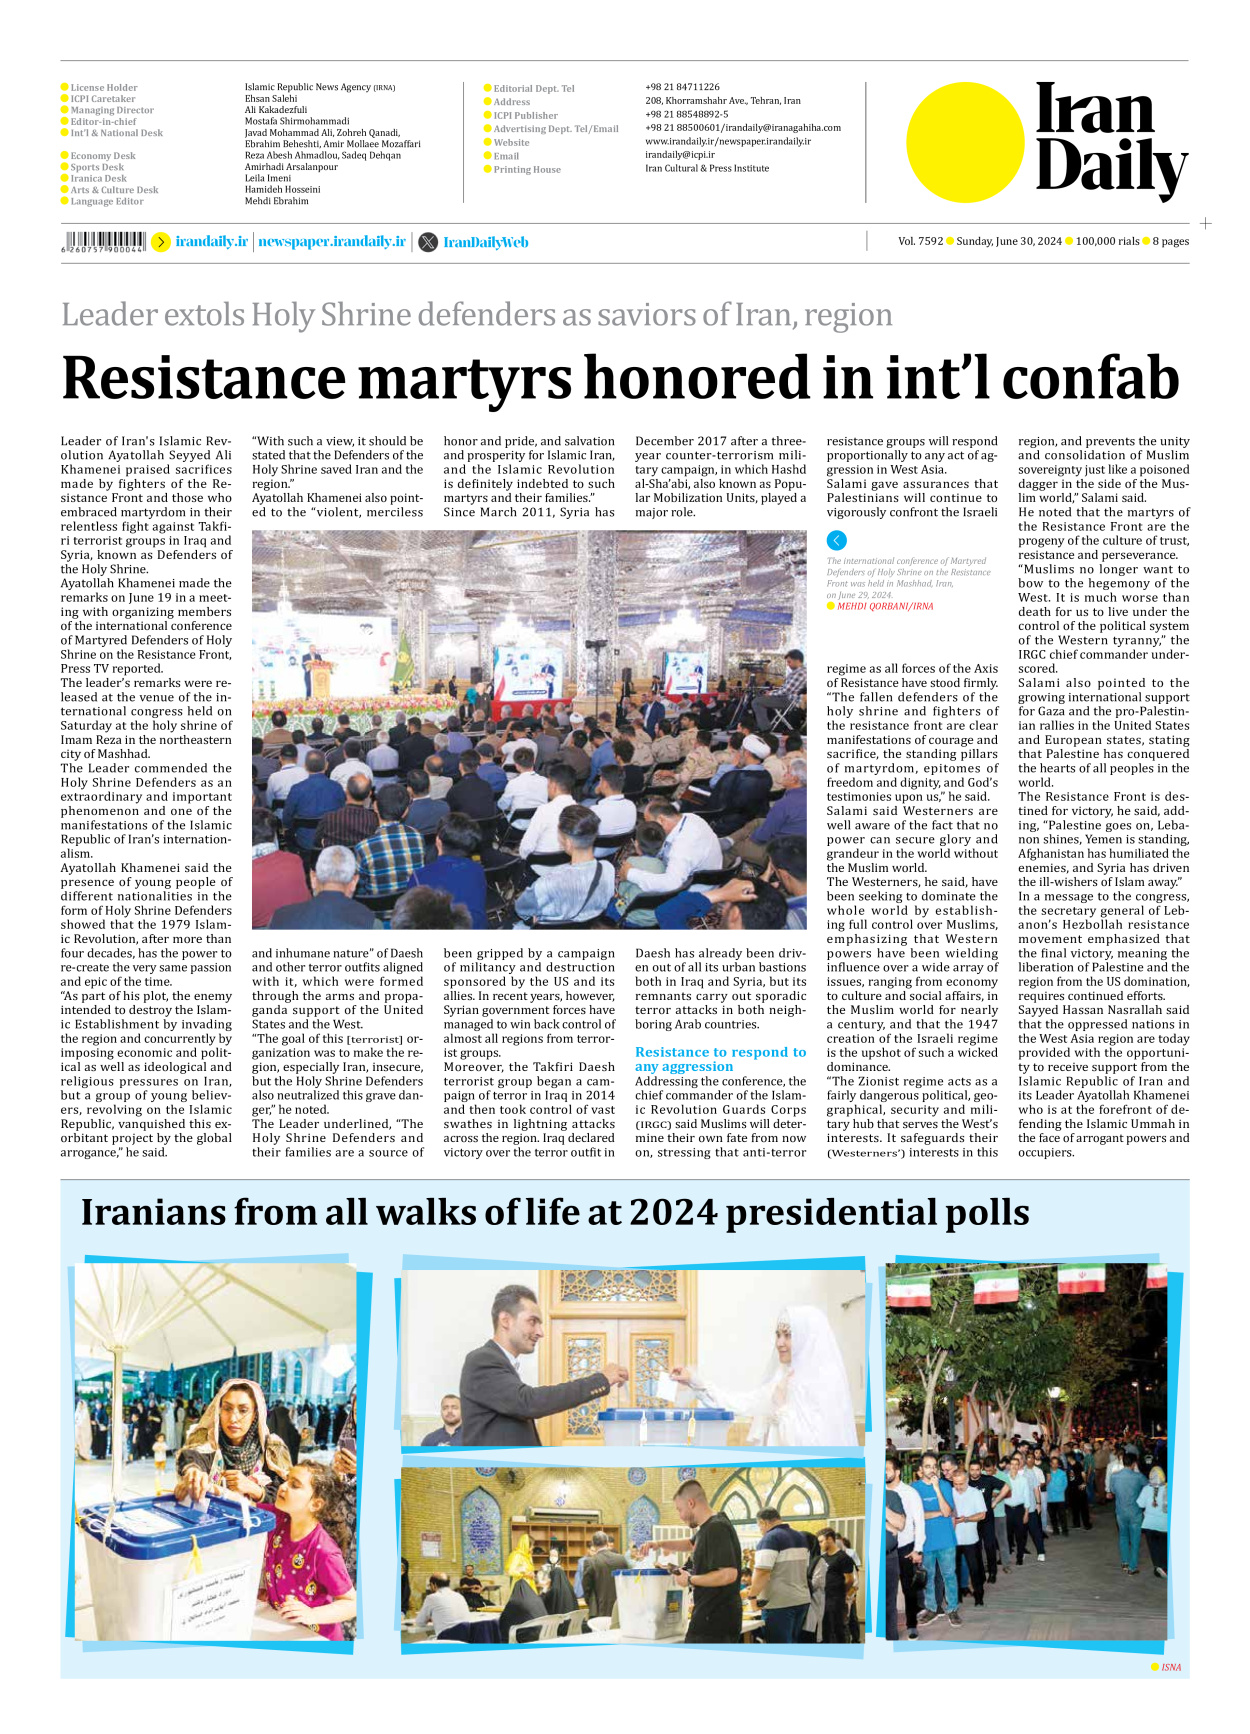 Iran Daily - Number Seven Thousand Five Hundred and Ninety Two - 30 June 2024 - Page 8